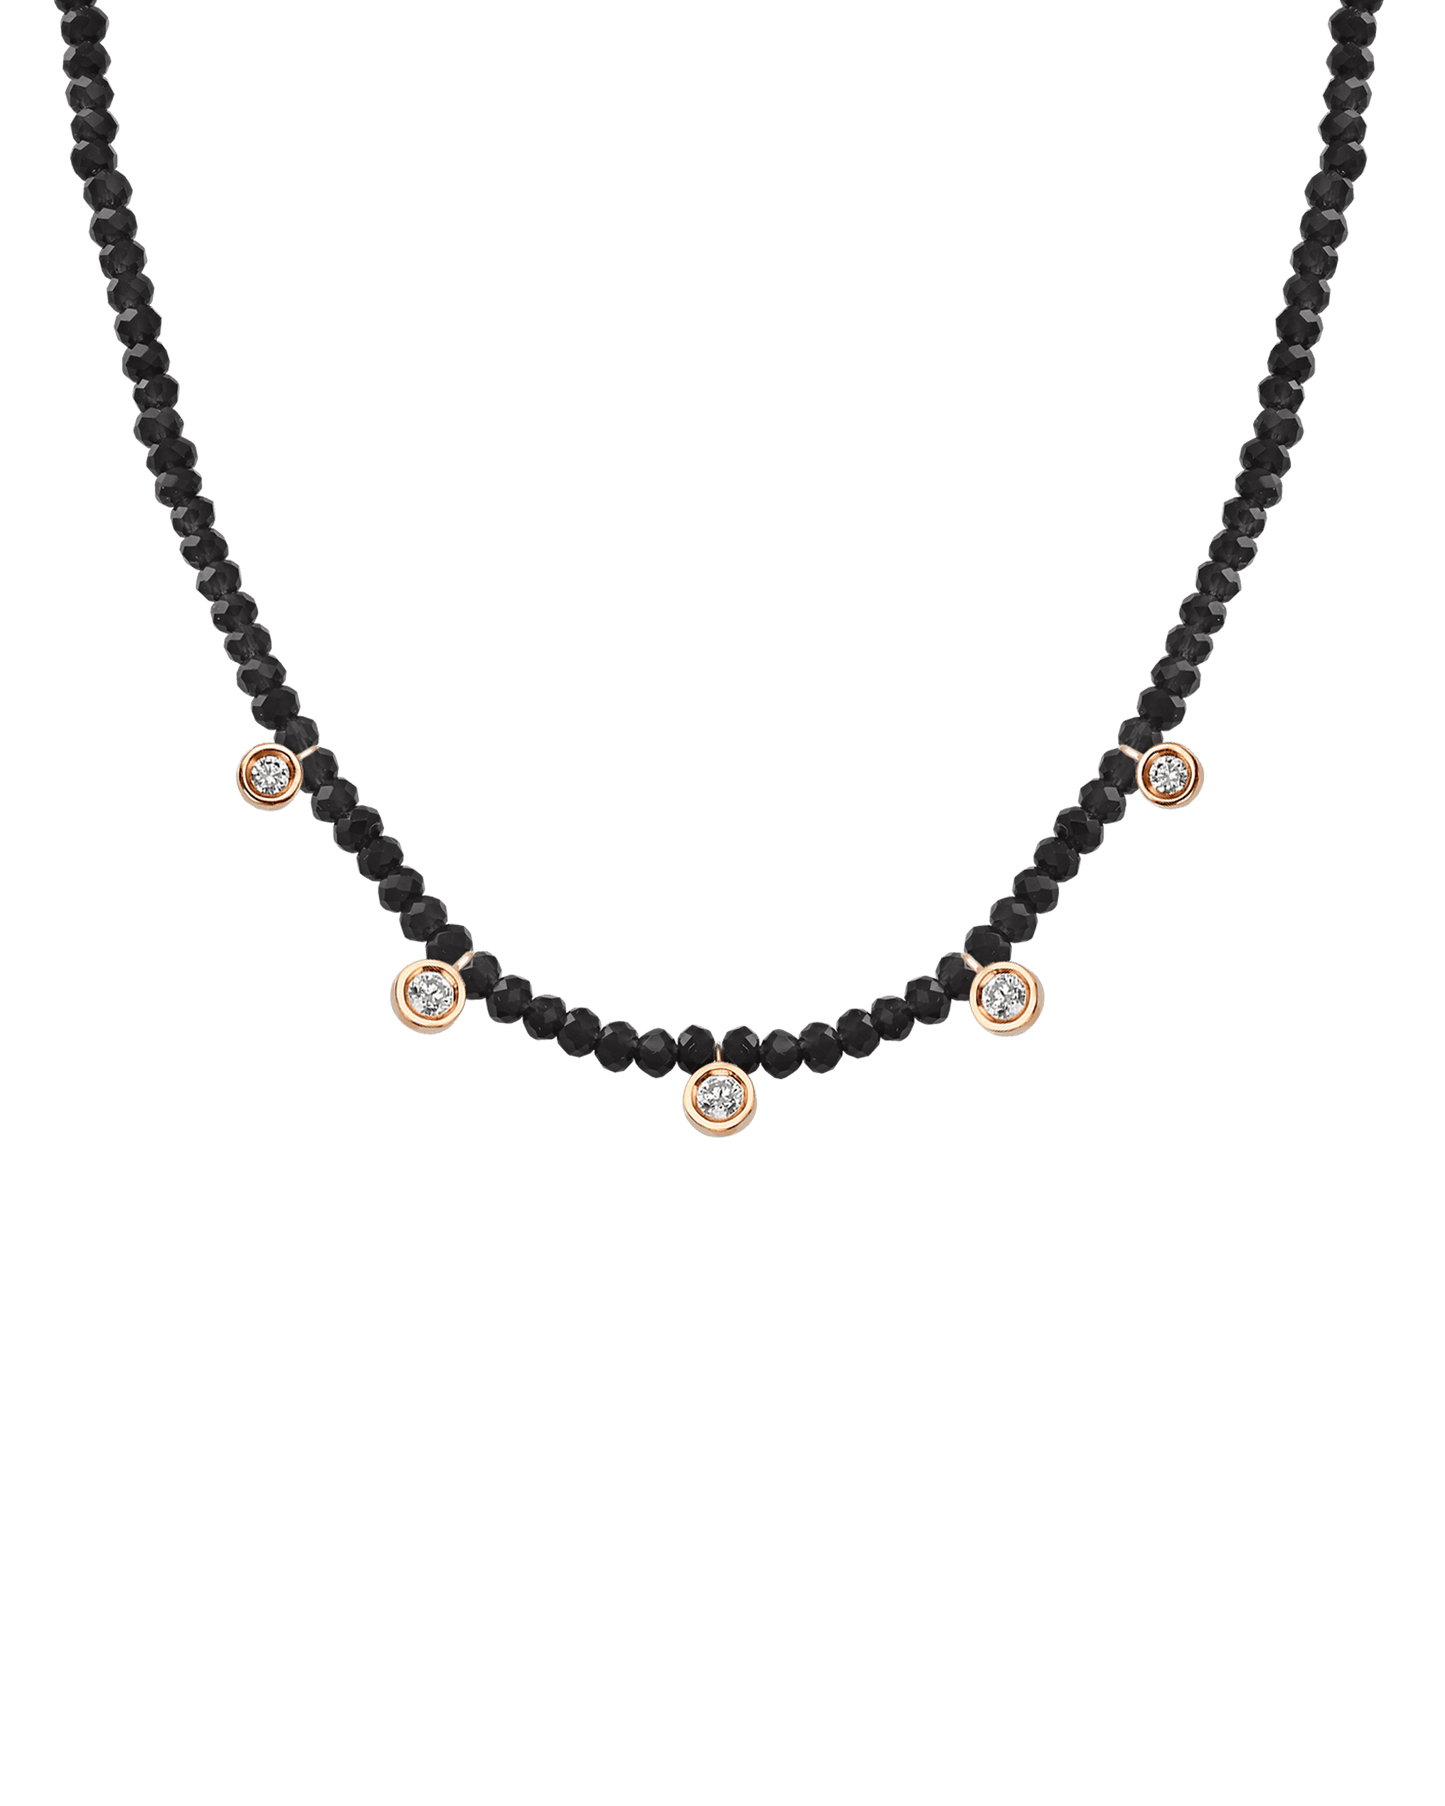 Black Spinel Gemstone & Five diamonds Necklace - 14K Yellow Gold Necklaces magal-dev 